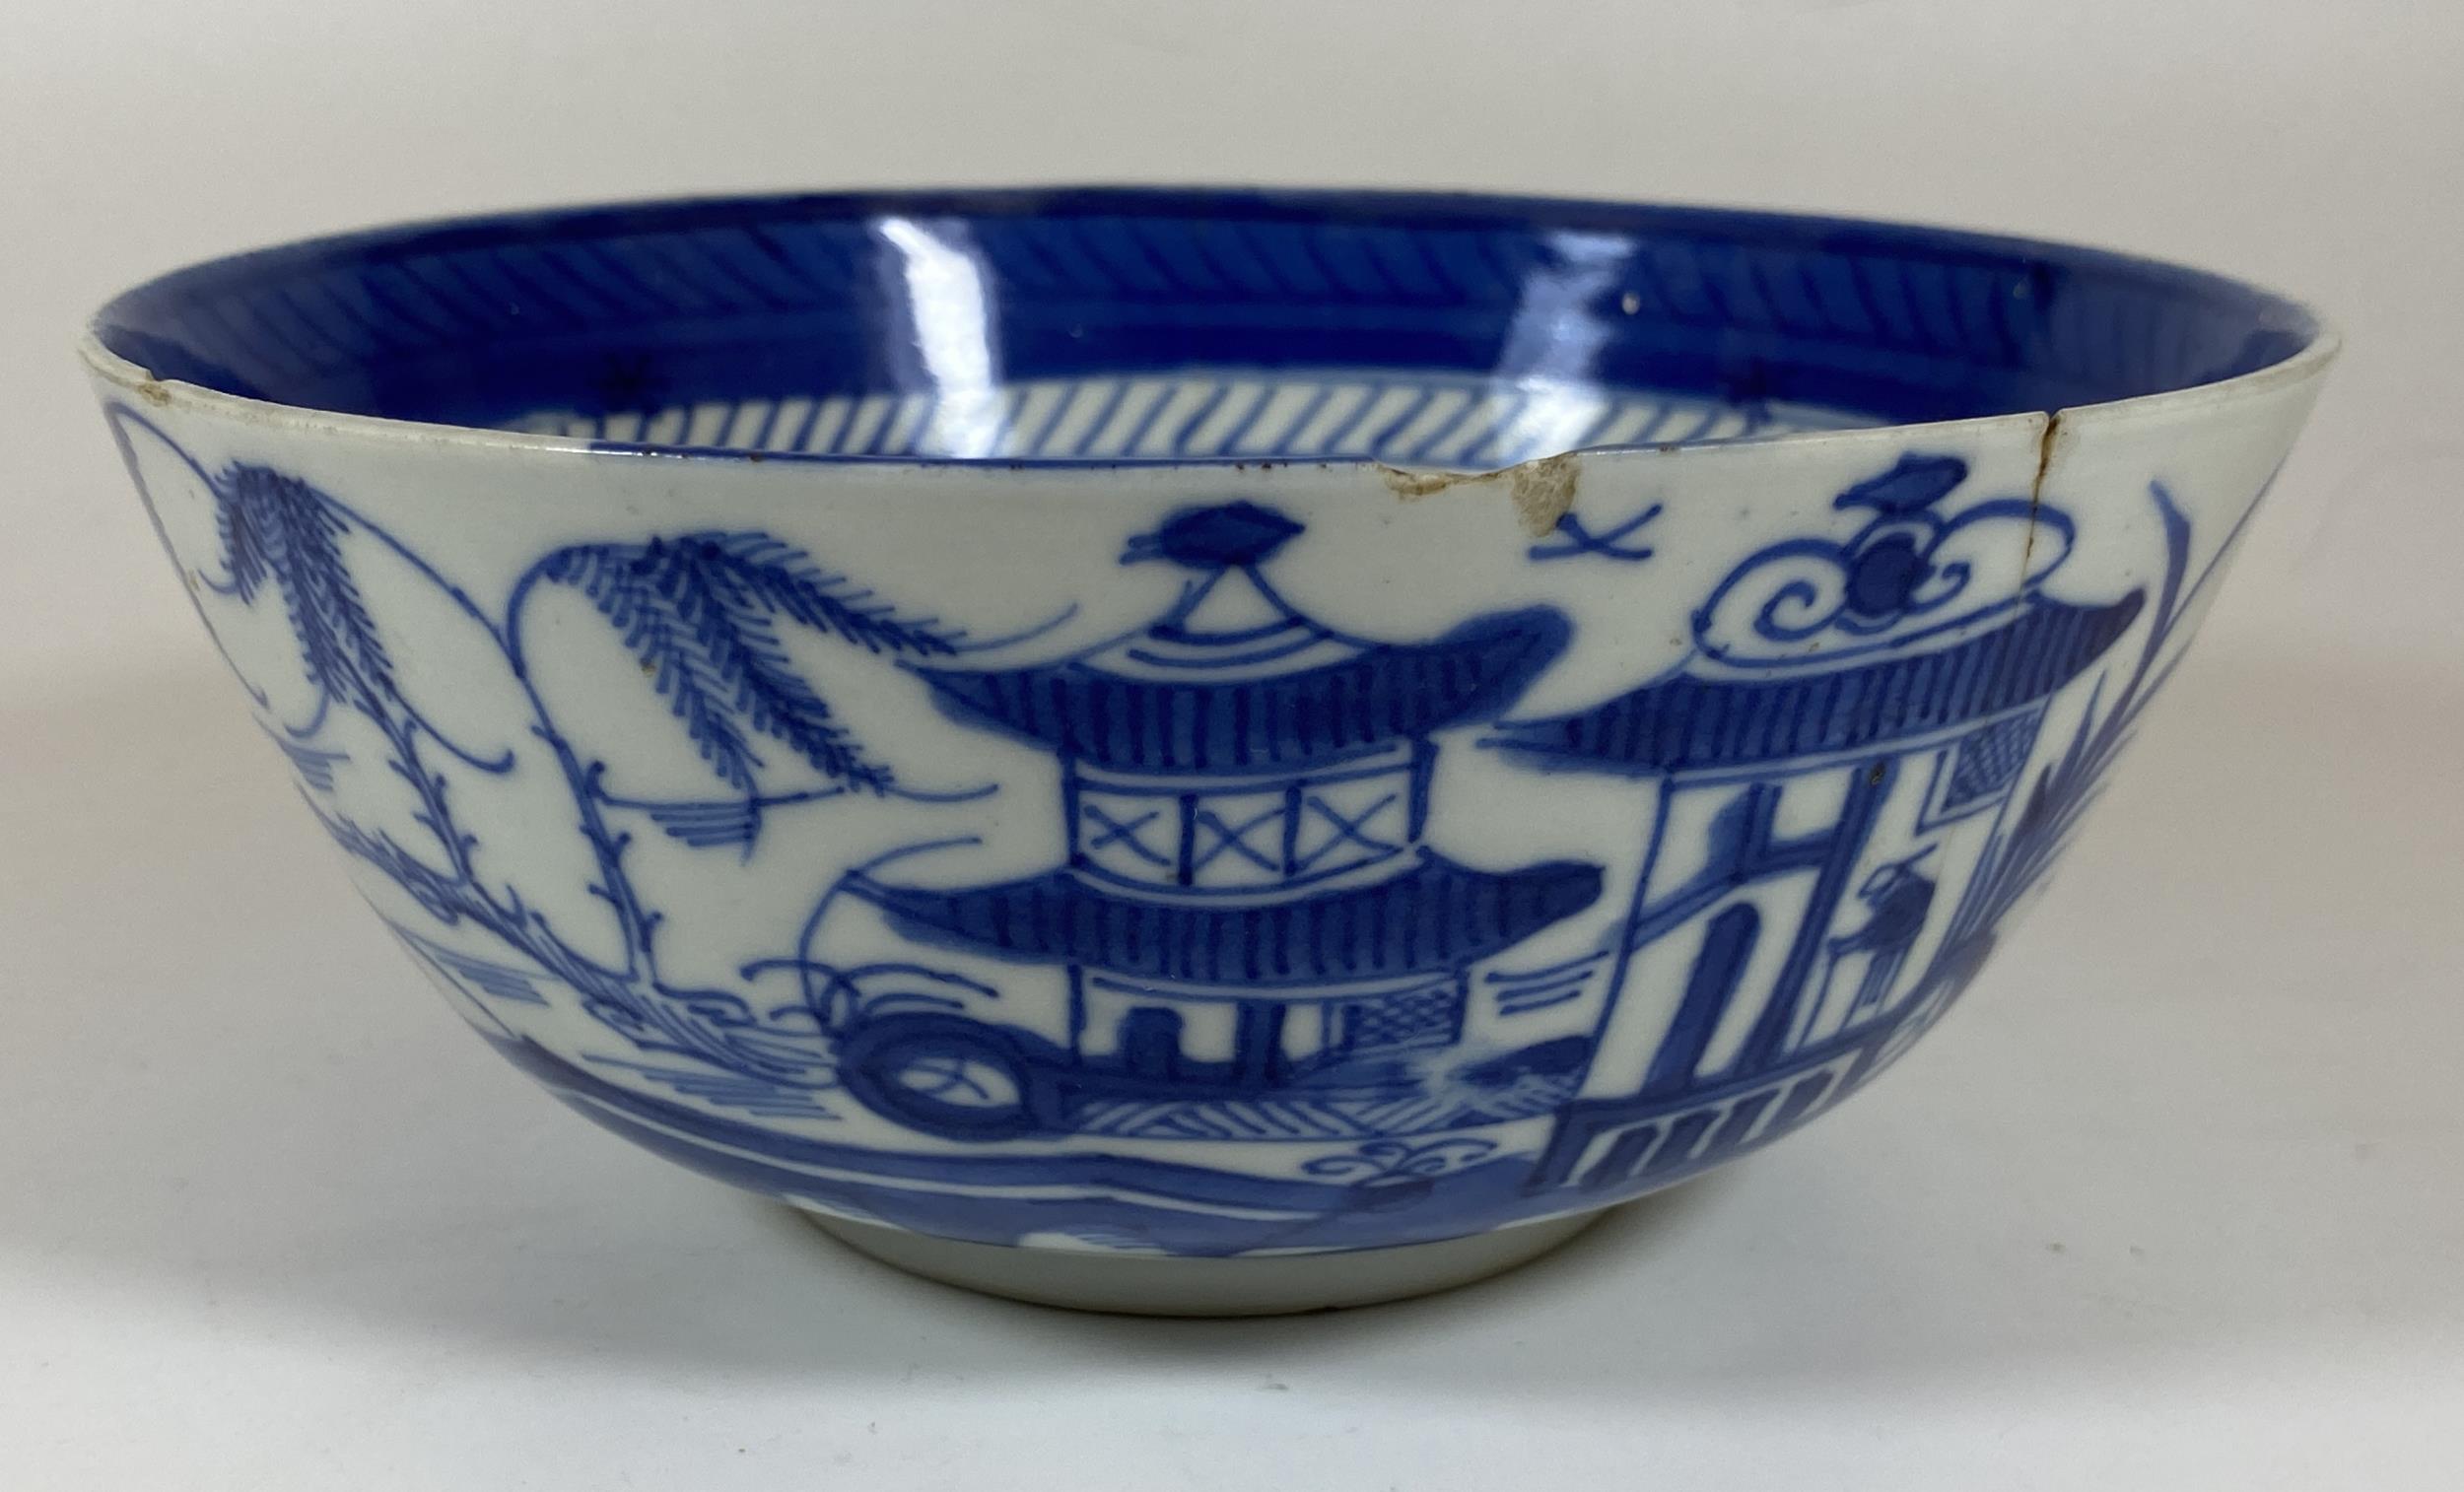 A 19TH CENTURY CHINESE BLUE AND WHITE PORCELAIN BOWL WITH PAGODA DESIGN, DIAMETER 17CM